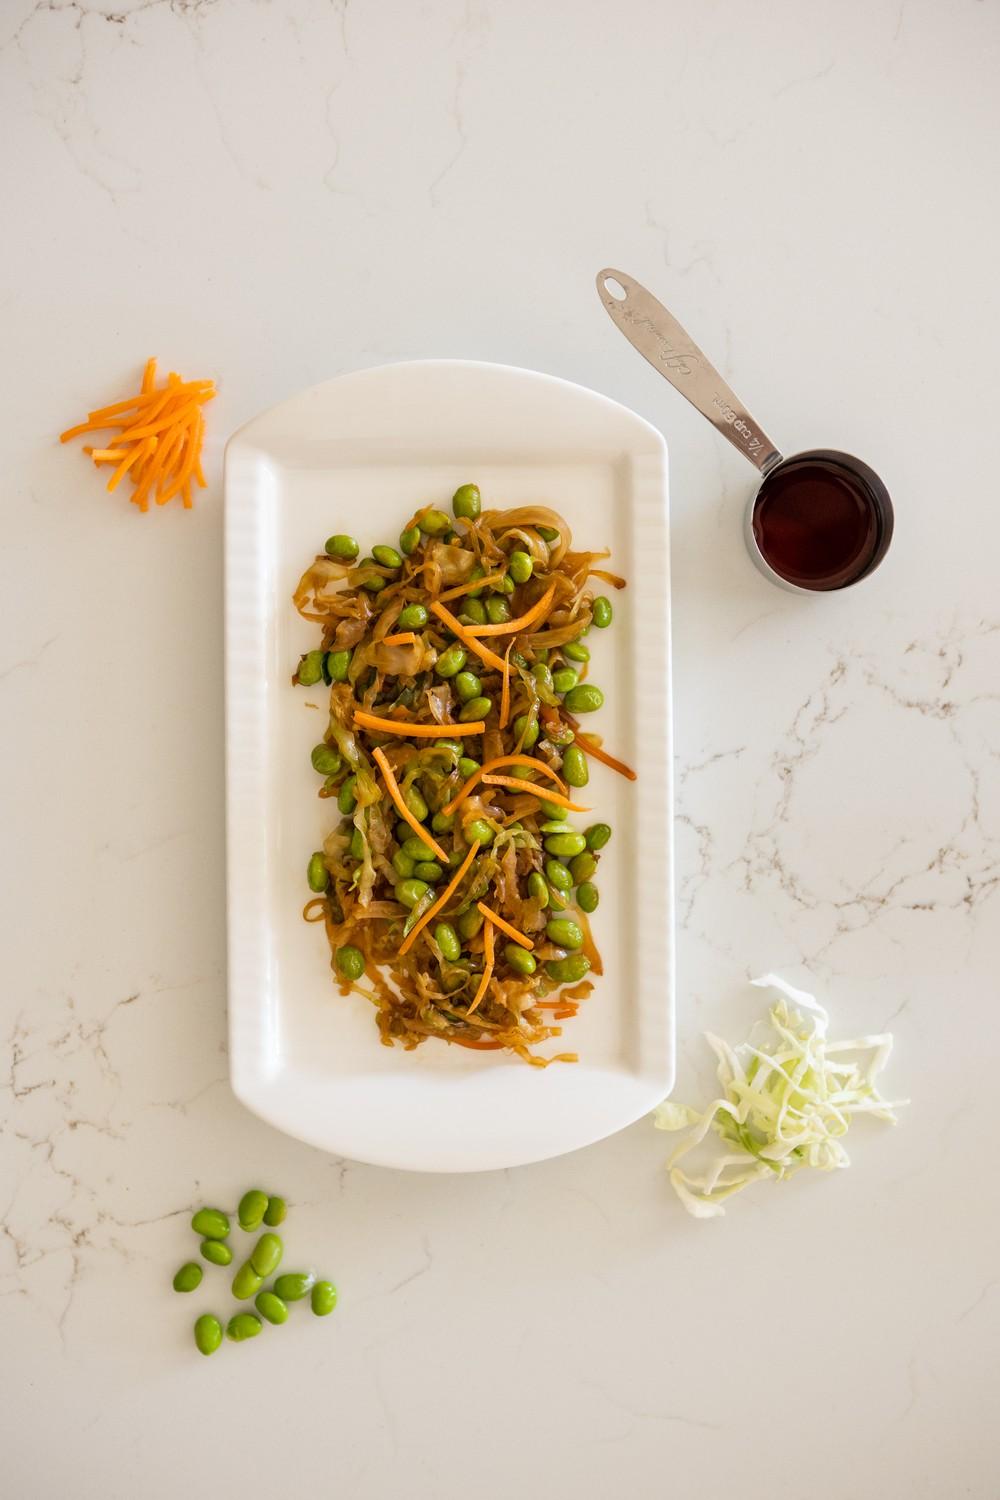 "Bigger Fresh to Fry" Edamame Stir Fry is a dish for a protein-filled afternoon. This meal can be made in under 10 minutes.